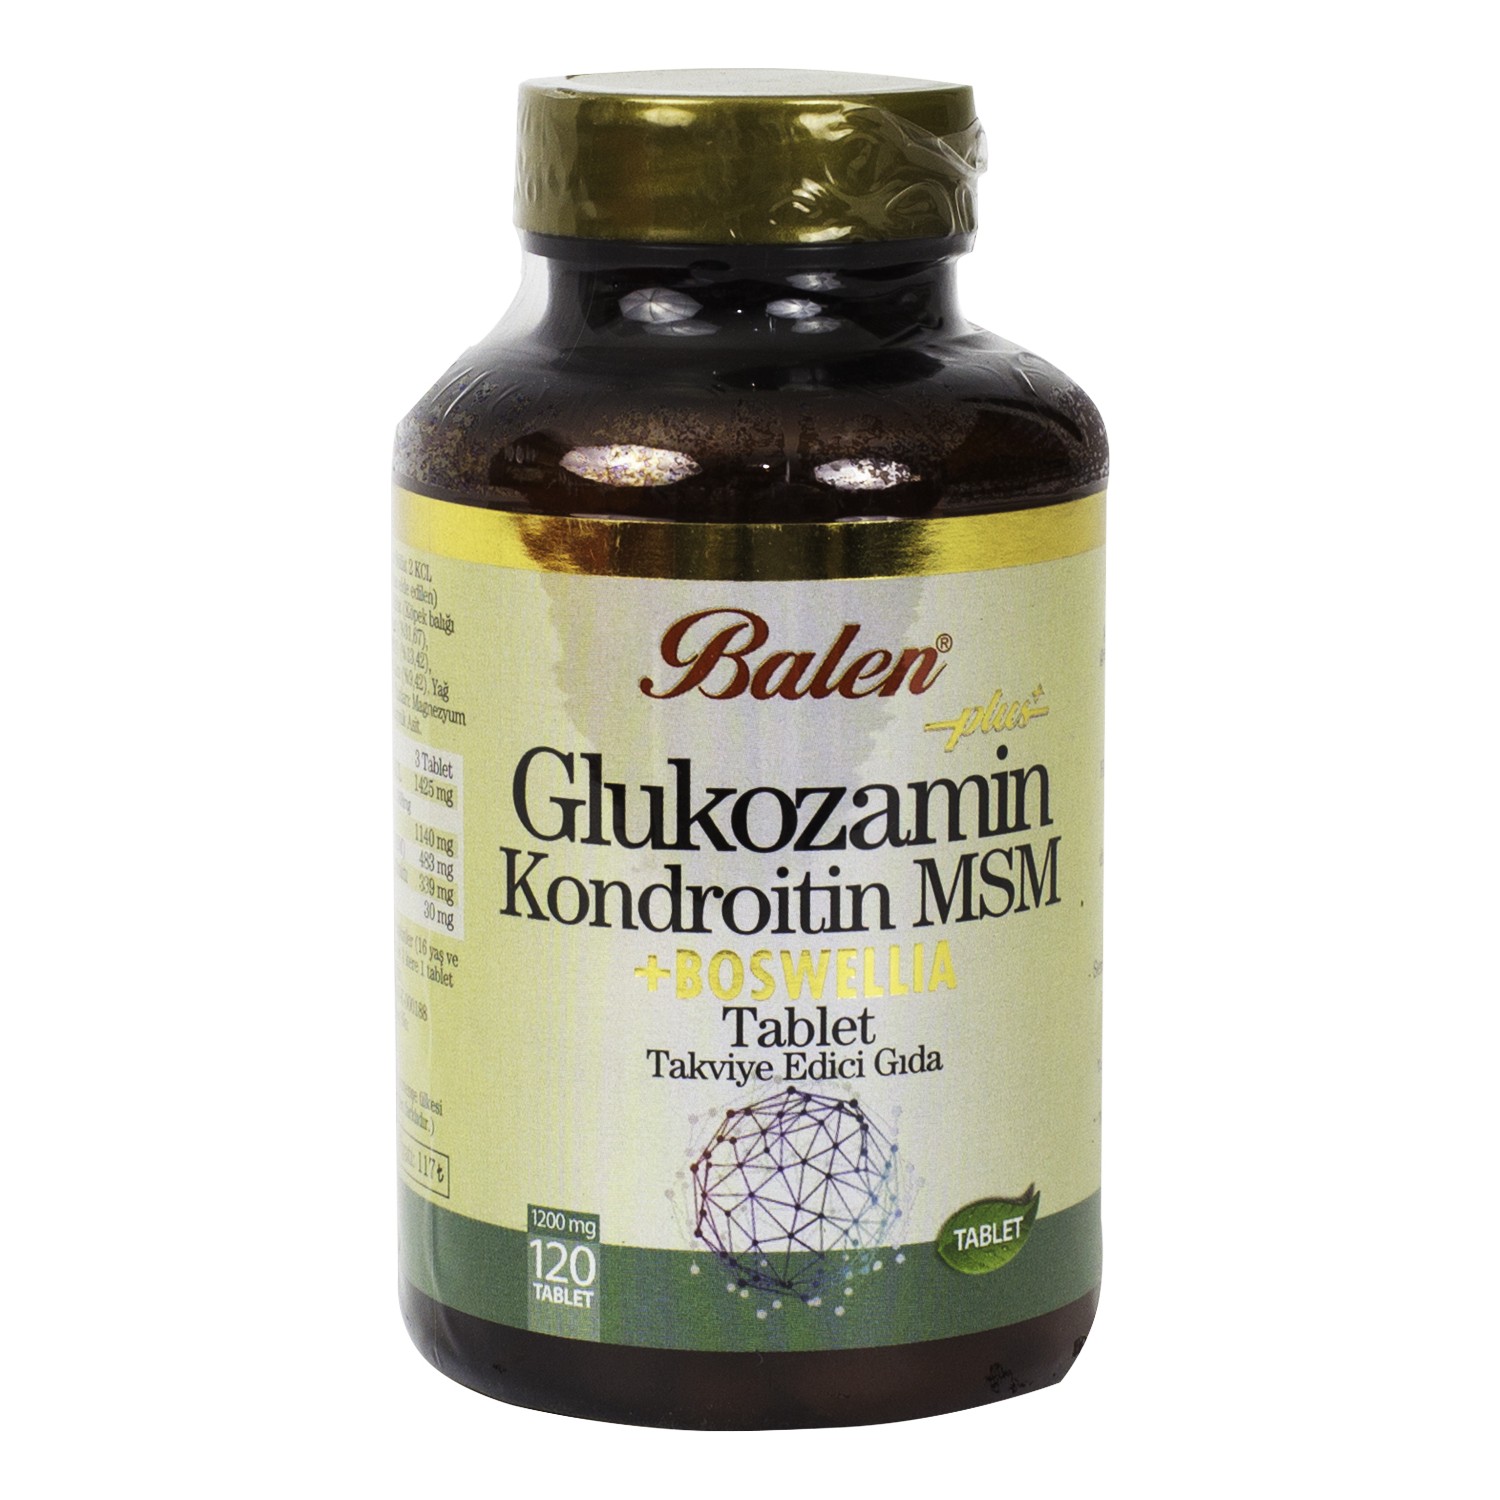 Активная добавка глюкозамин Balen Chondroitin Msm Boswellia, 120 капсул, 1200 мг nutralife glucosamine chondroitin sulfate 180caps healthy joint function cartilage ligaments mobility flexibility osteoarthritis